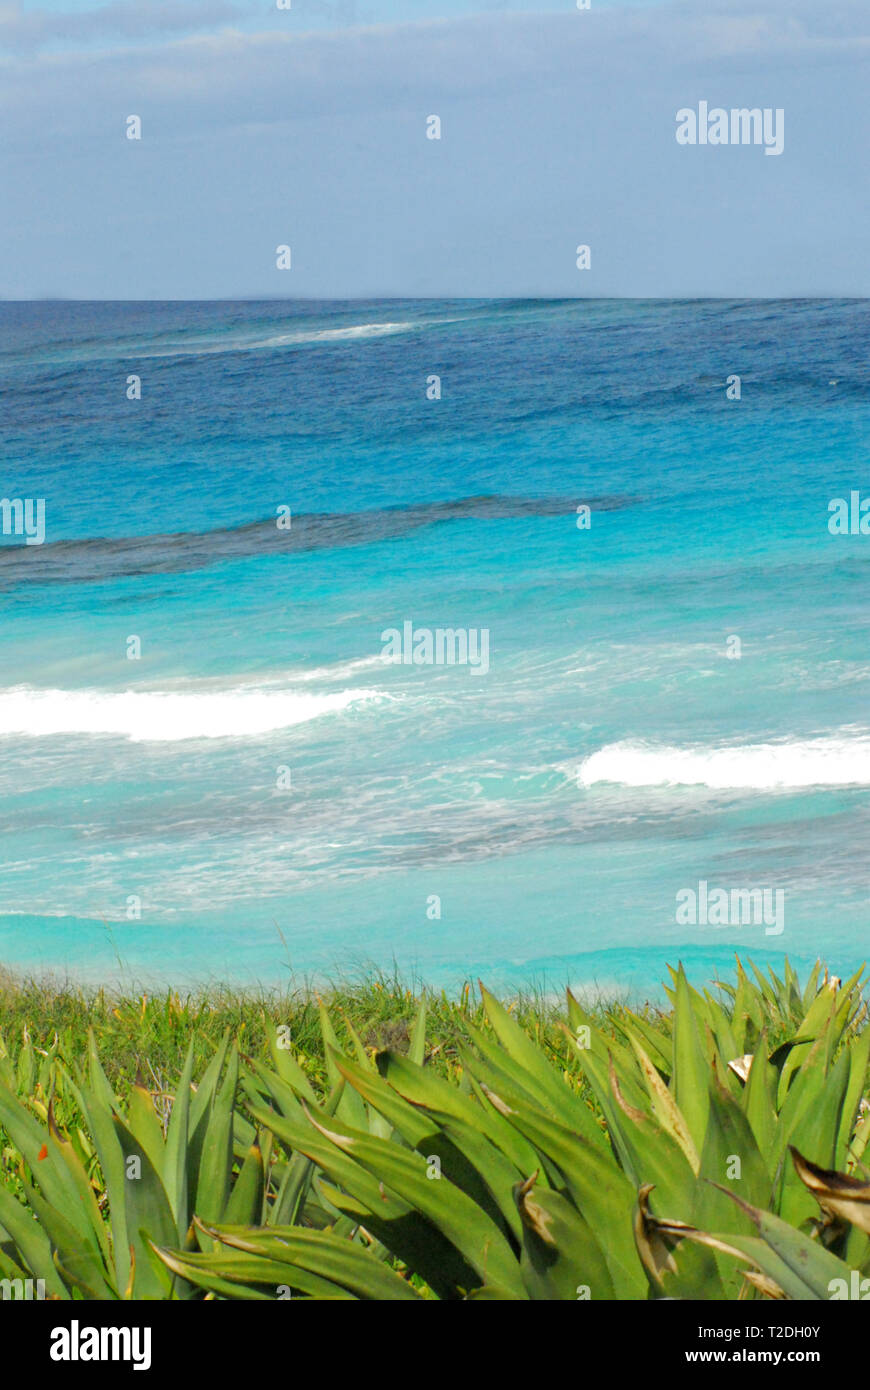 A beautiful vertical seascape of an aqua ocean contrasted with green succulents and grasses on the shore. Stock Photo